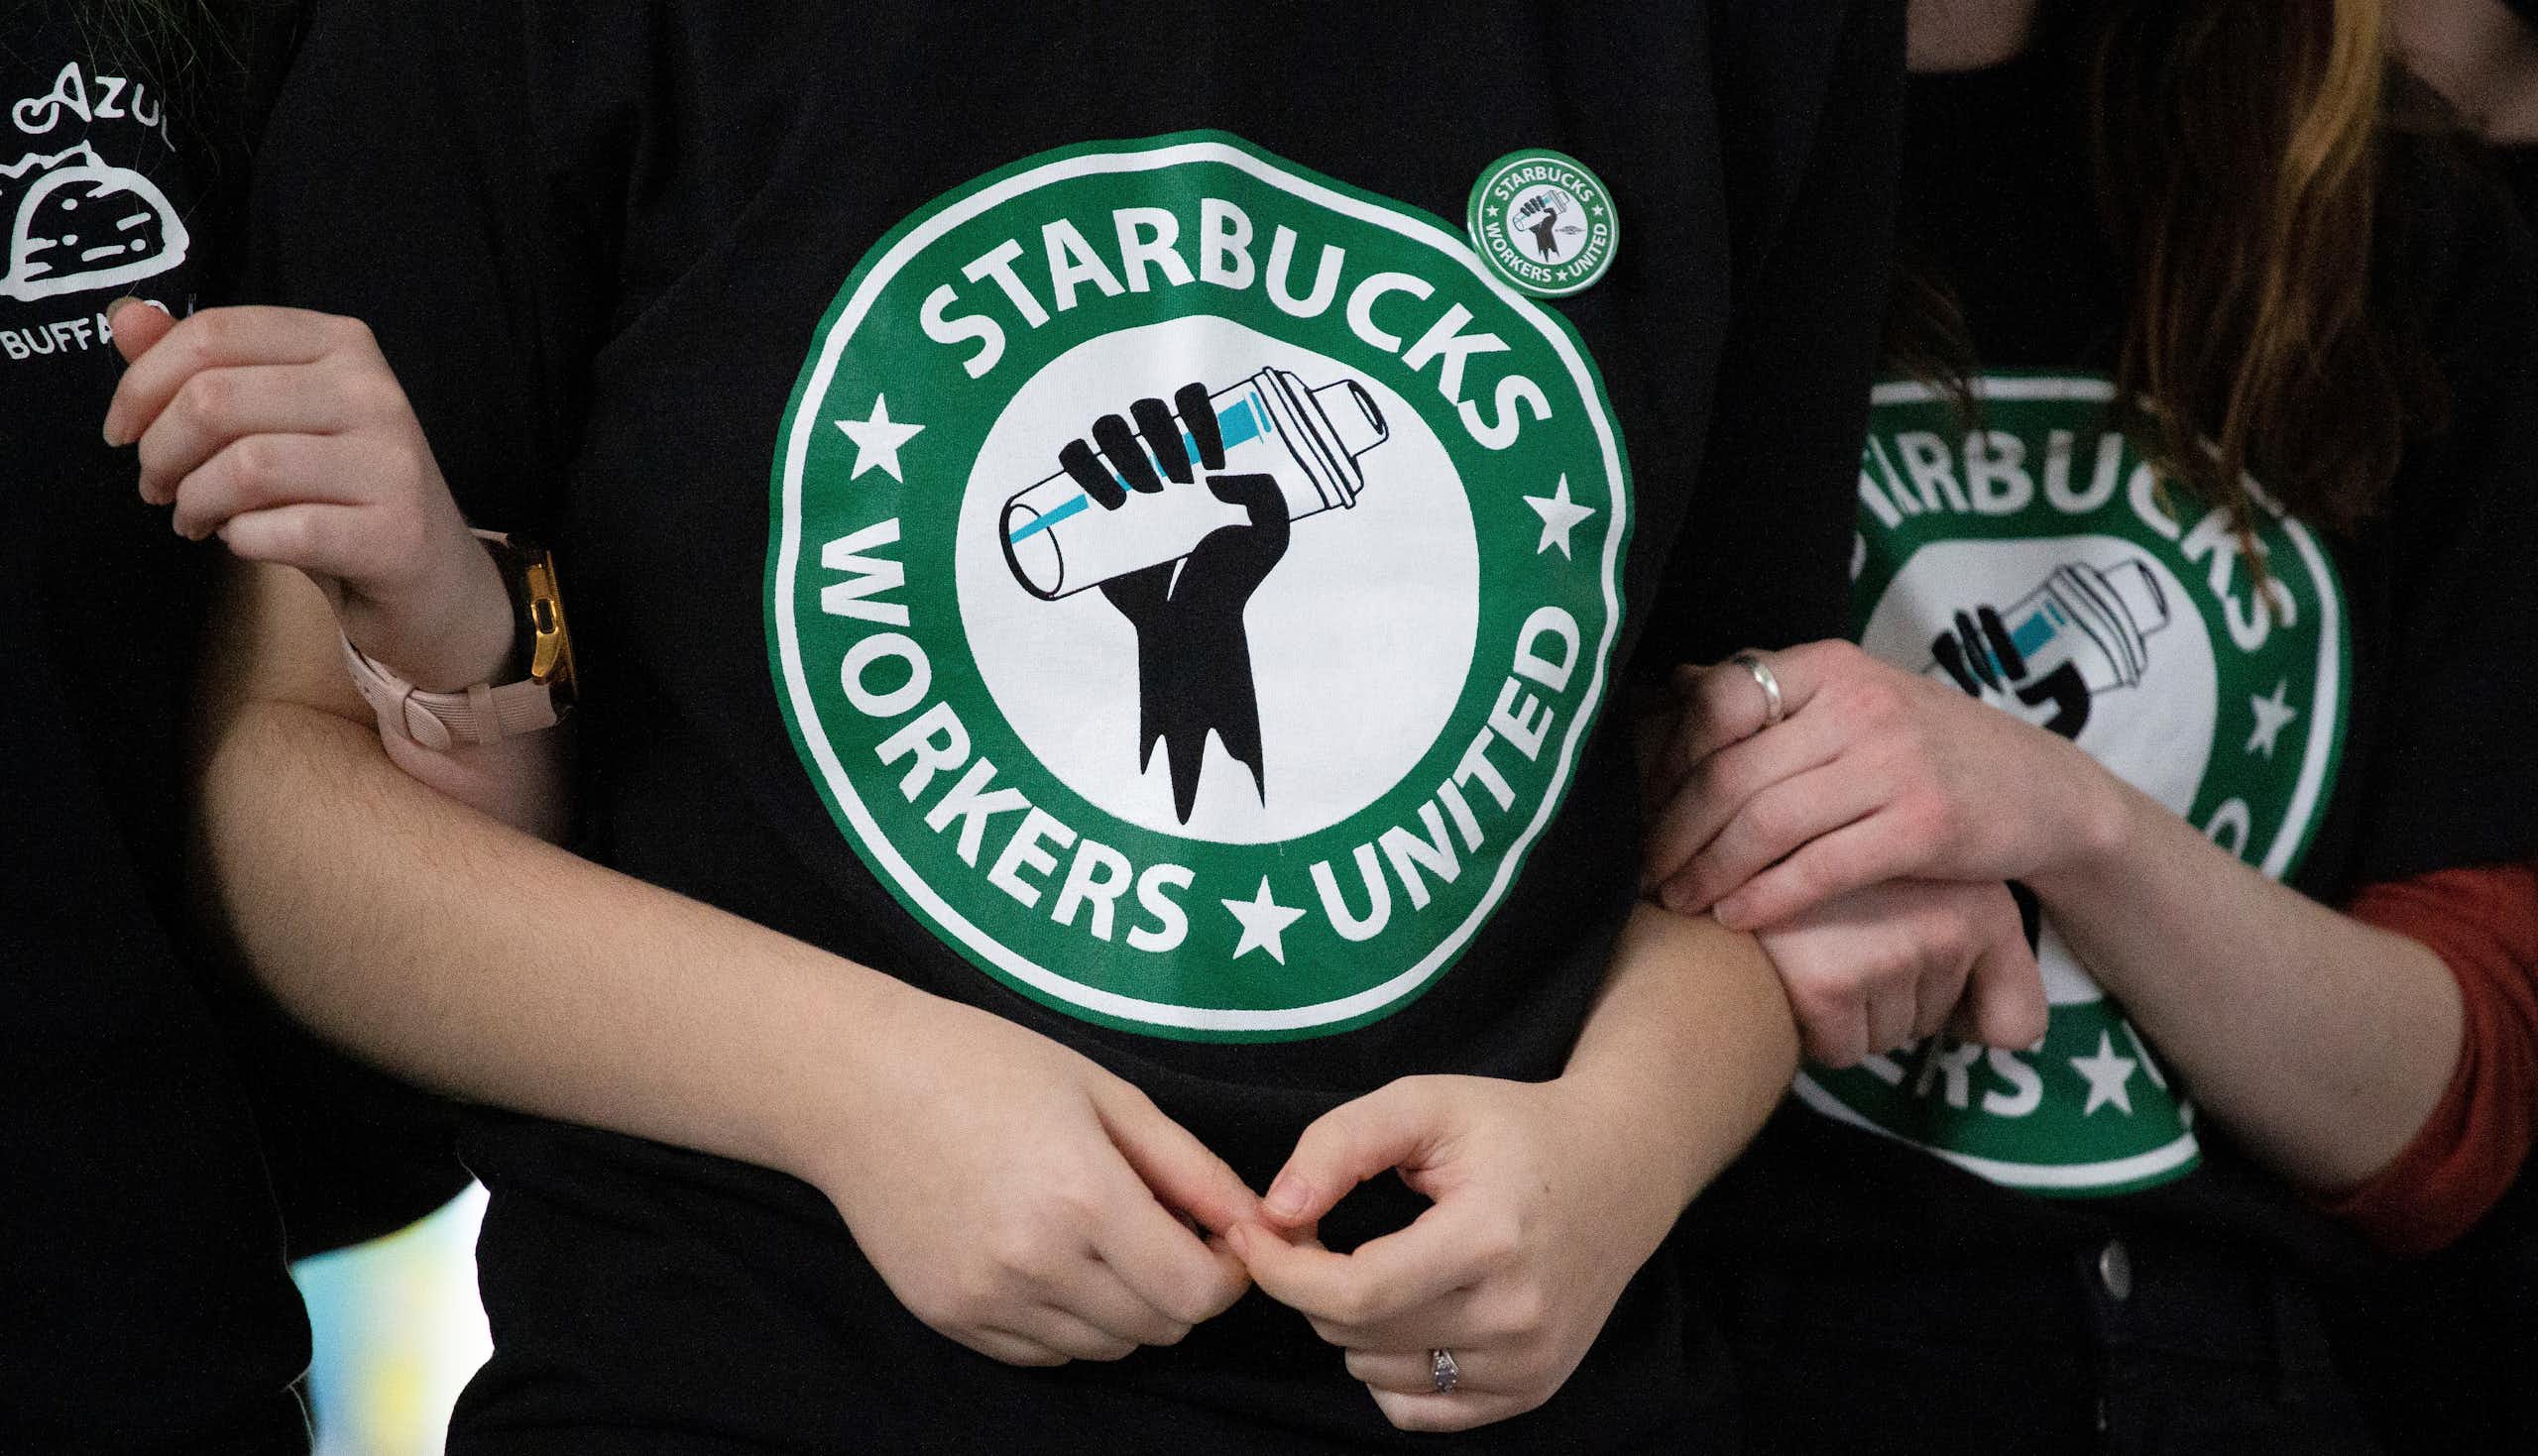 Starbucks employees and supporters link arms, with two wearing Starbucks Workers United t-shirts.